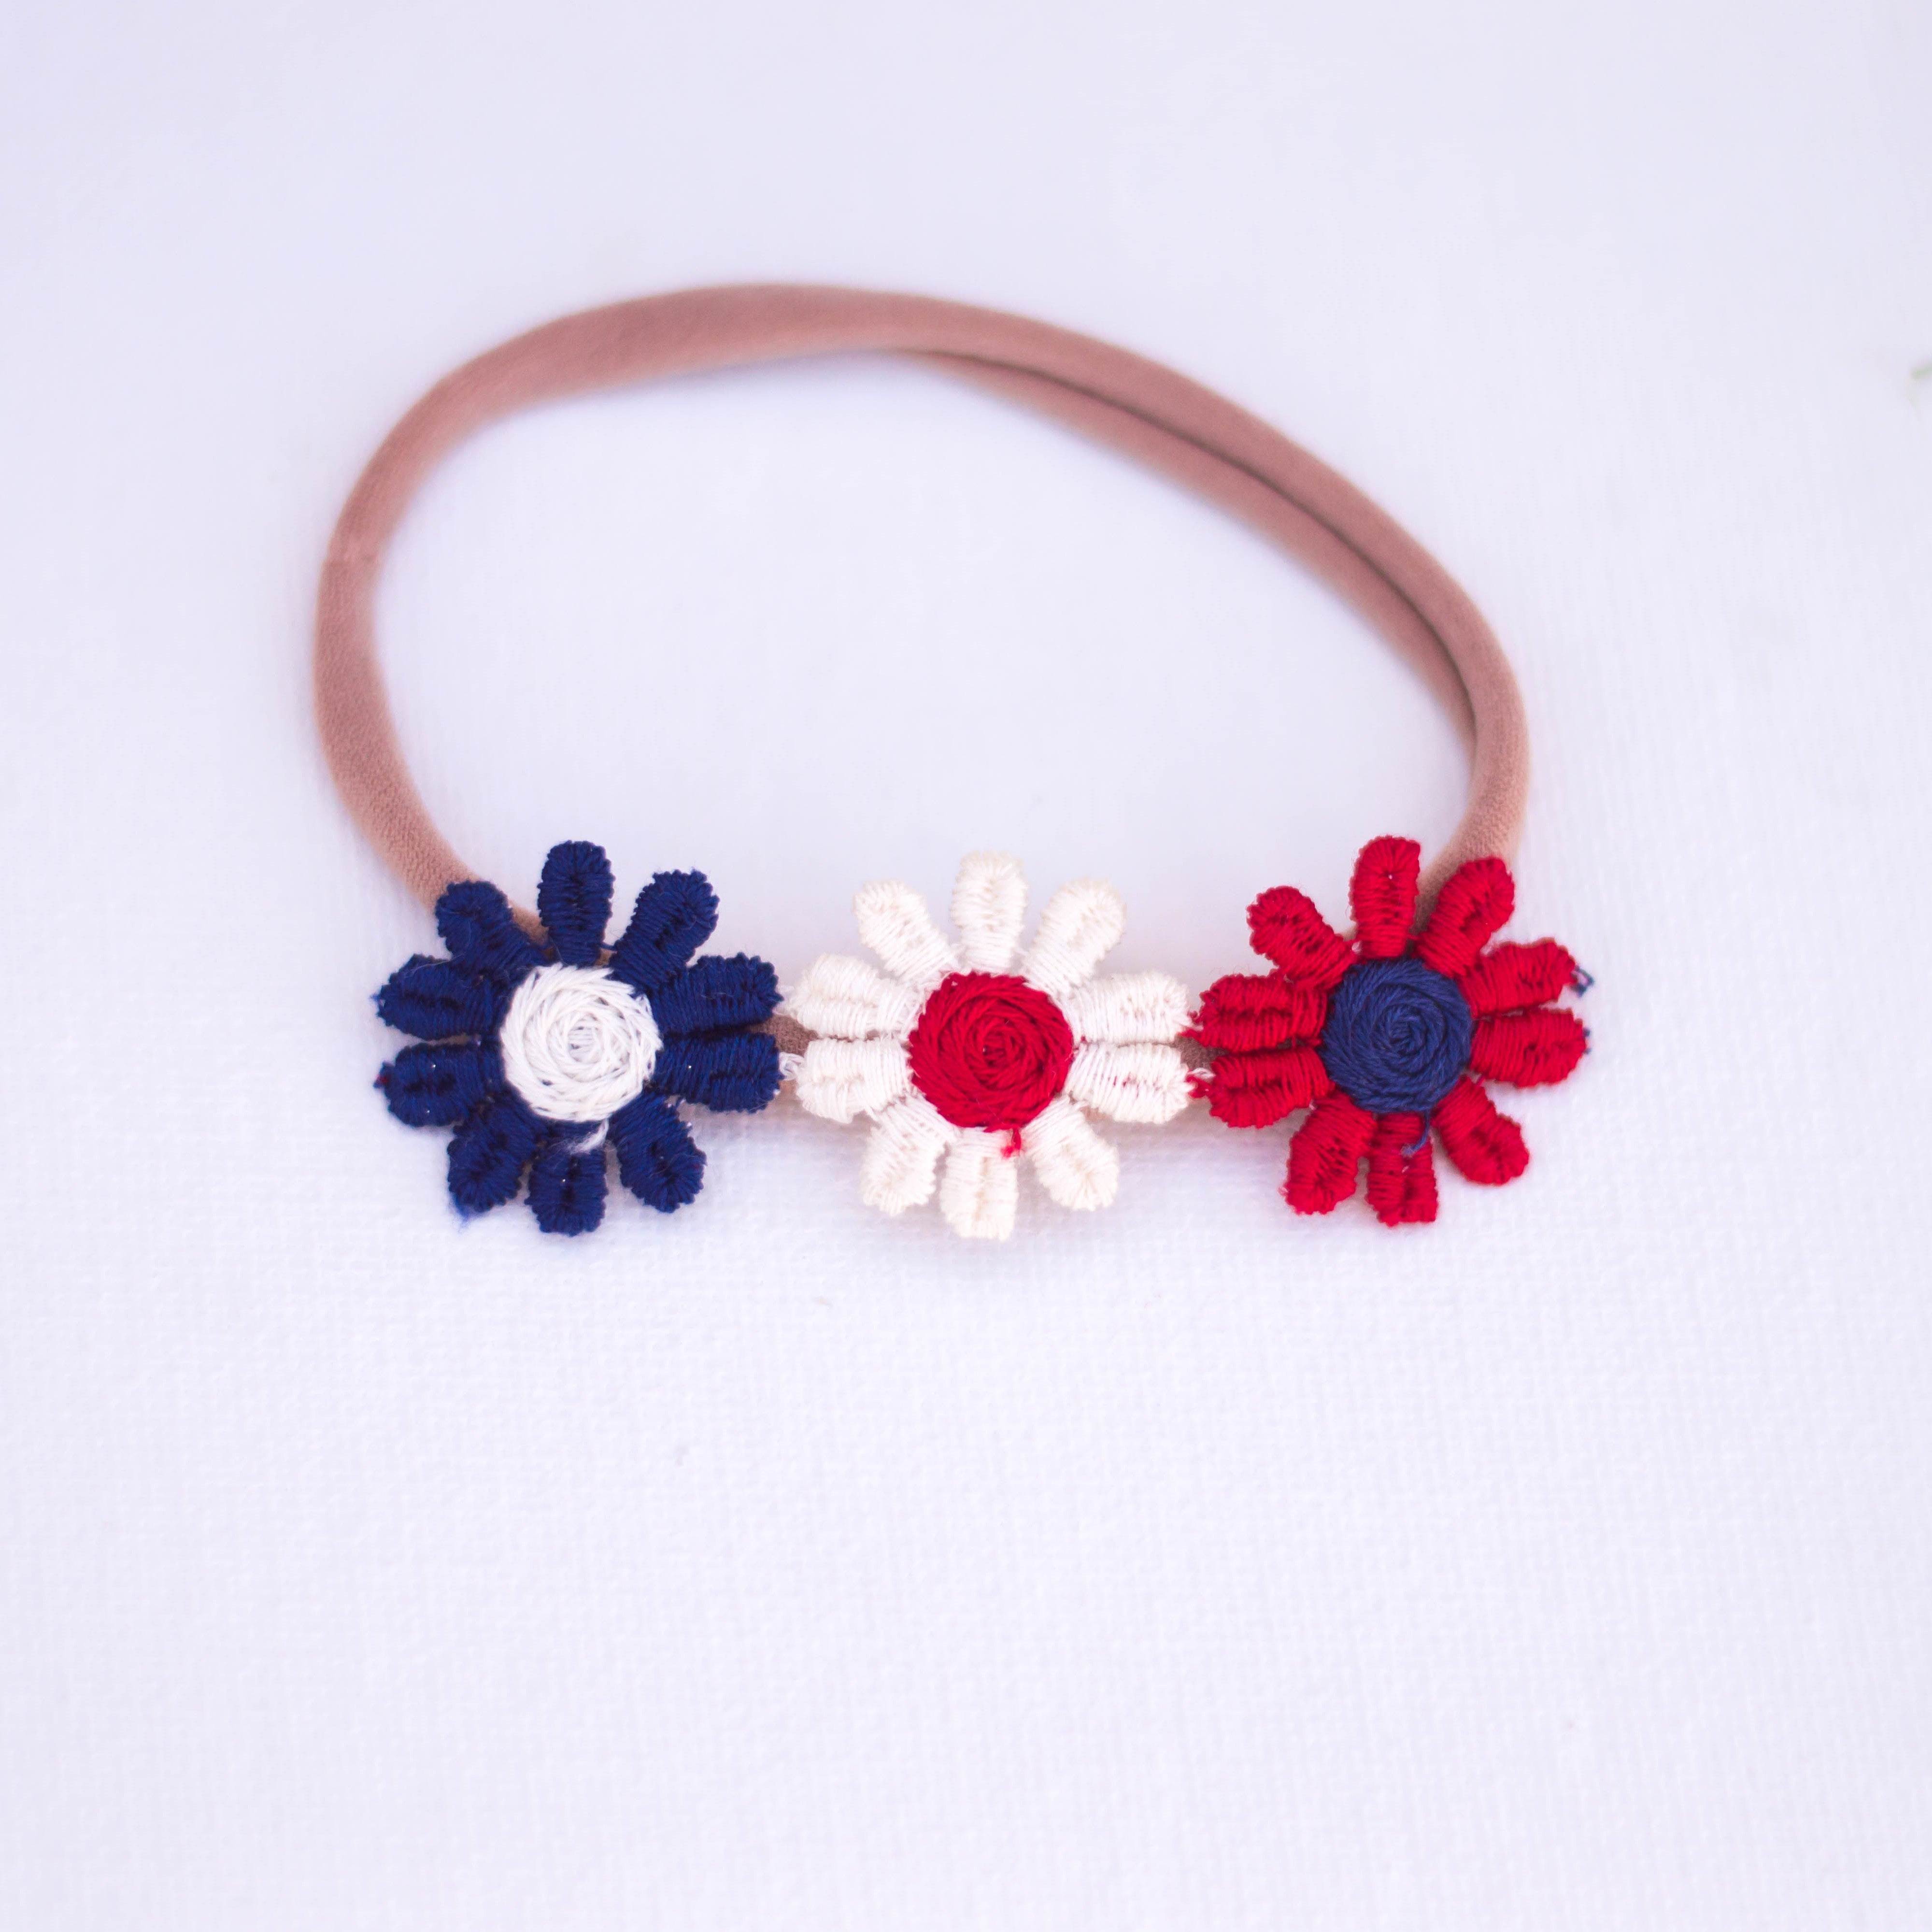 Vintage floral , red white and blue lace